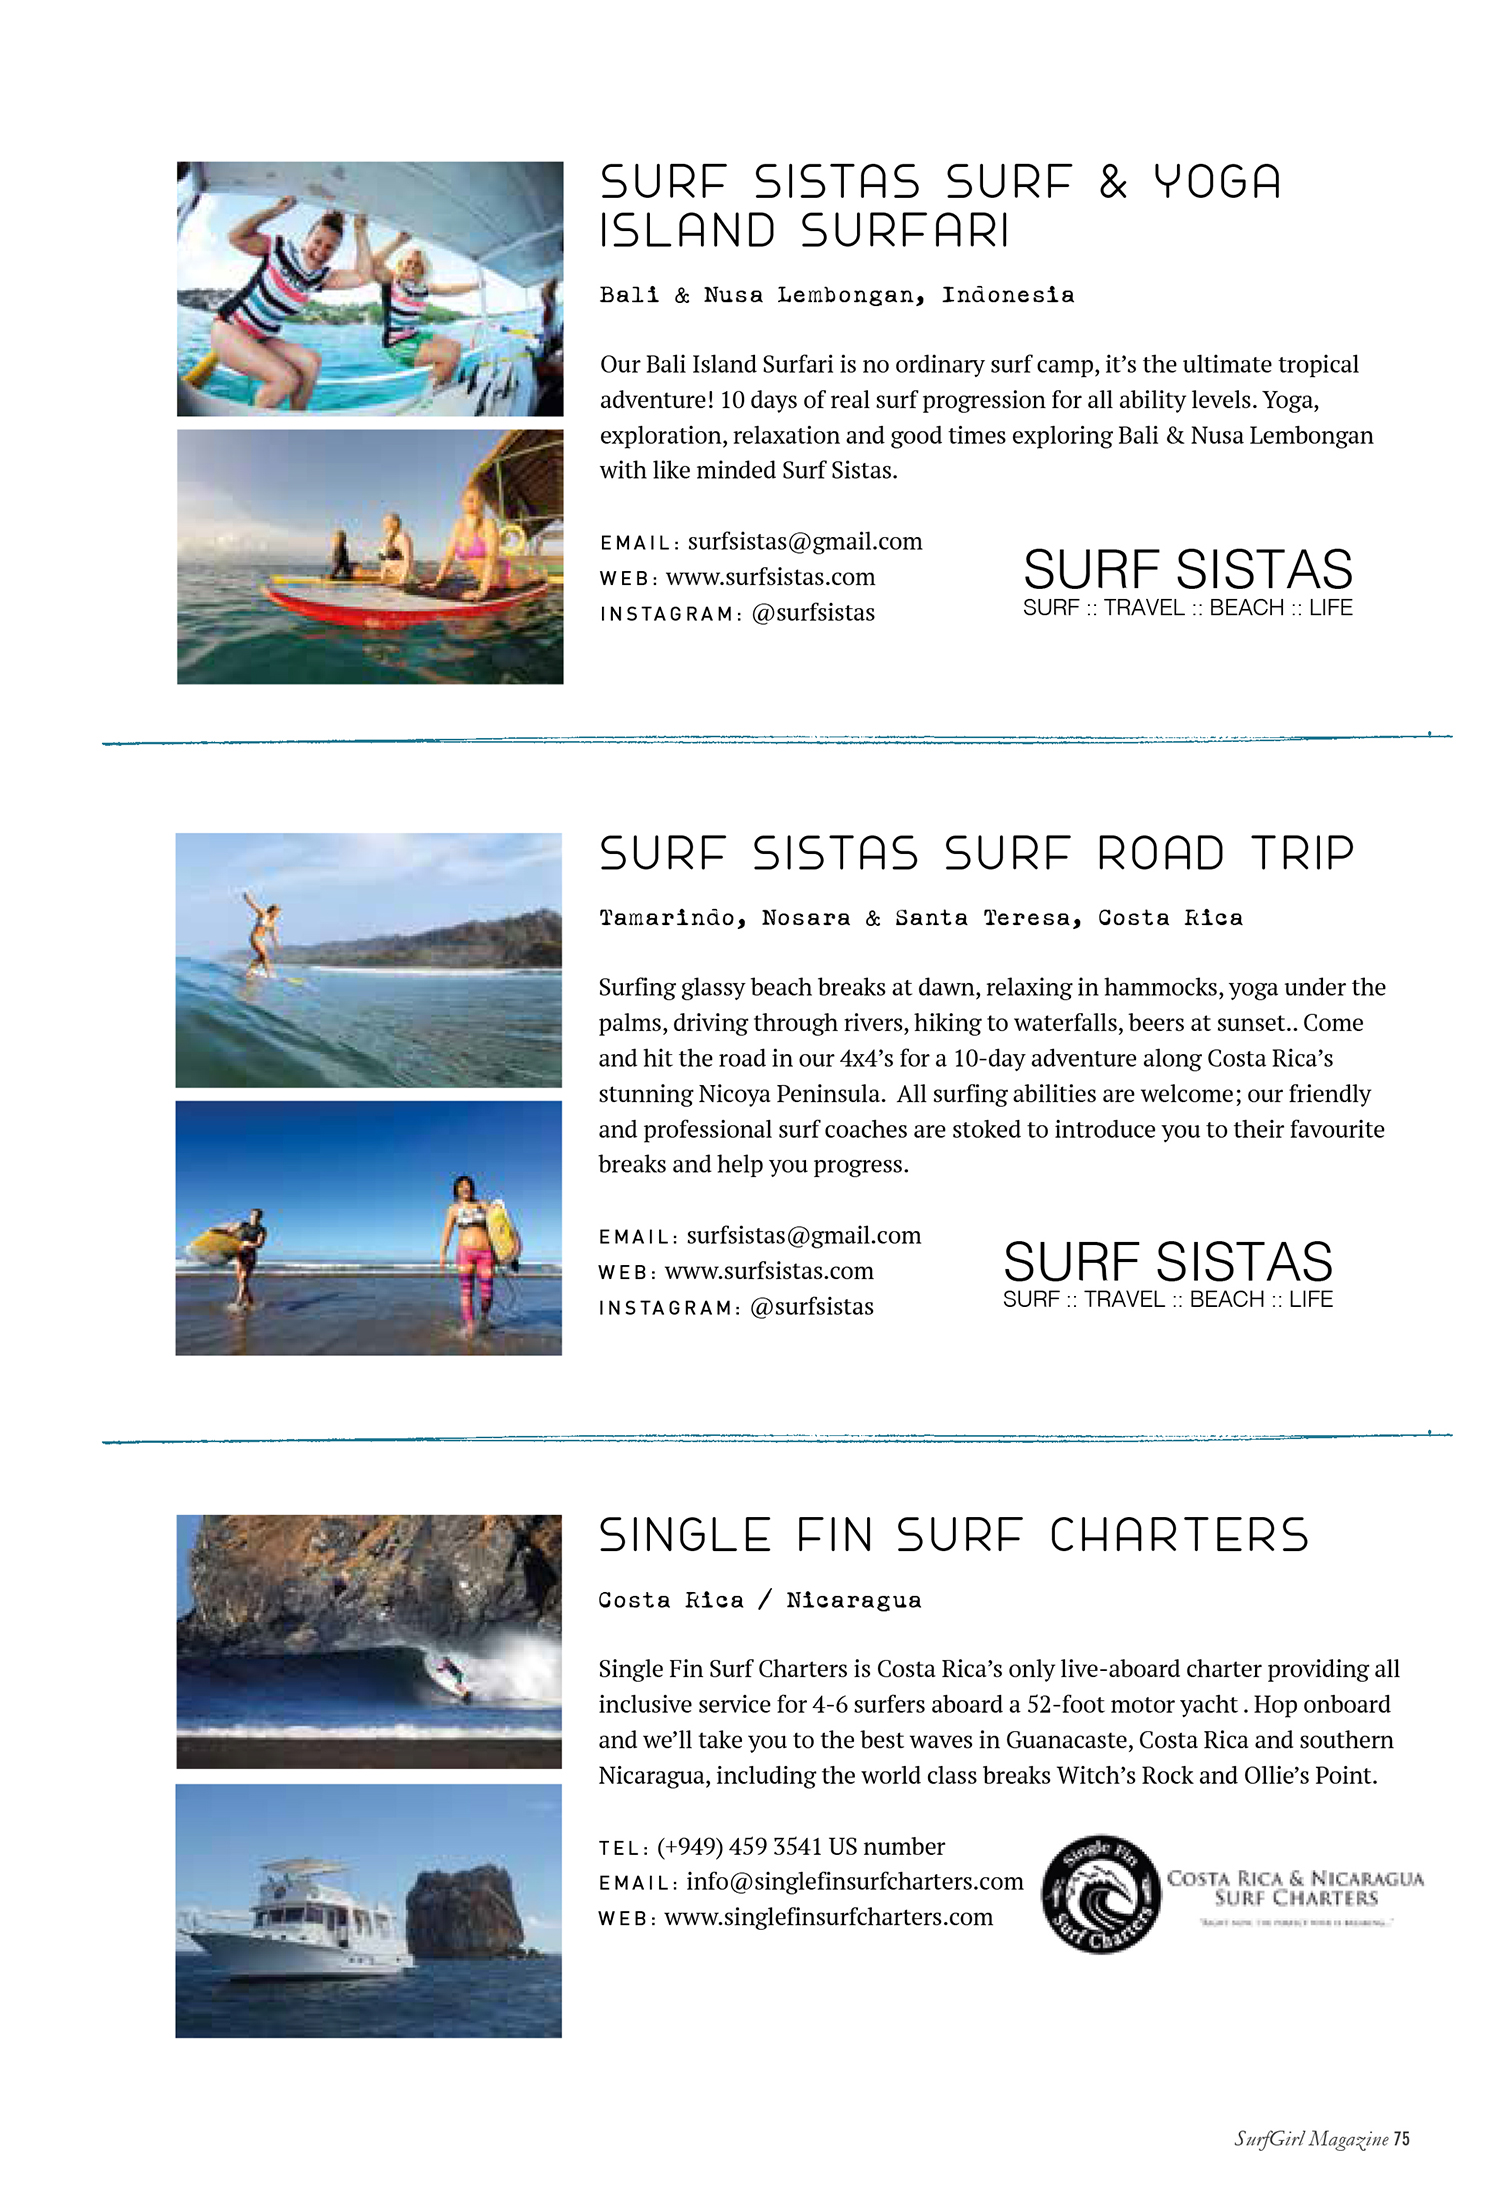 Surfgirl Magazine - Travel Guide featuring Surf Sistas vacations